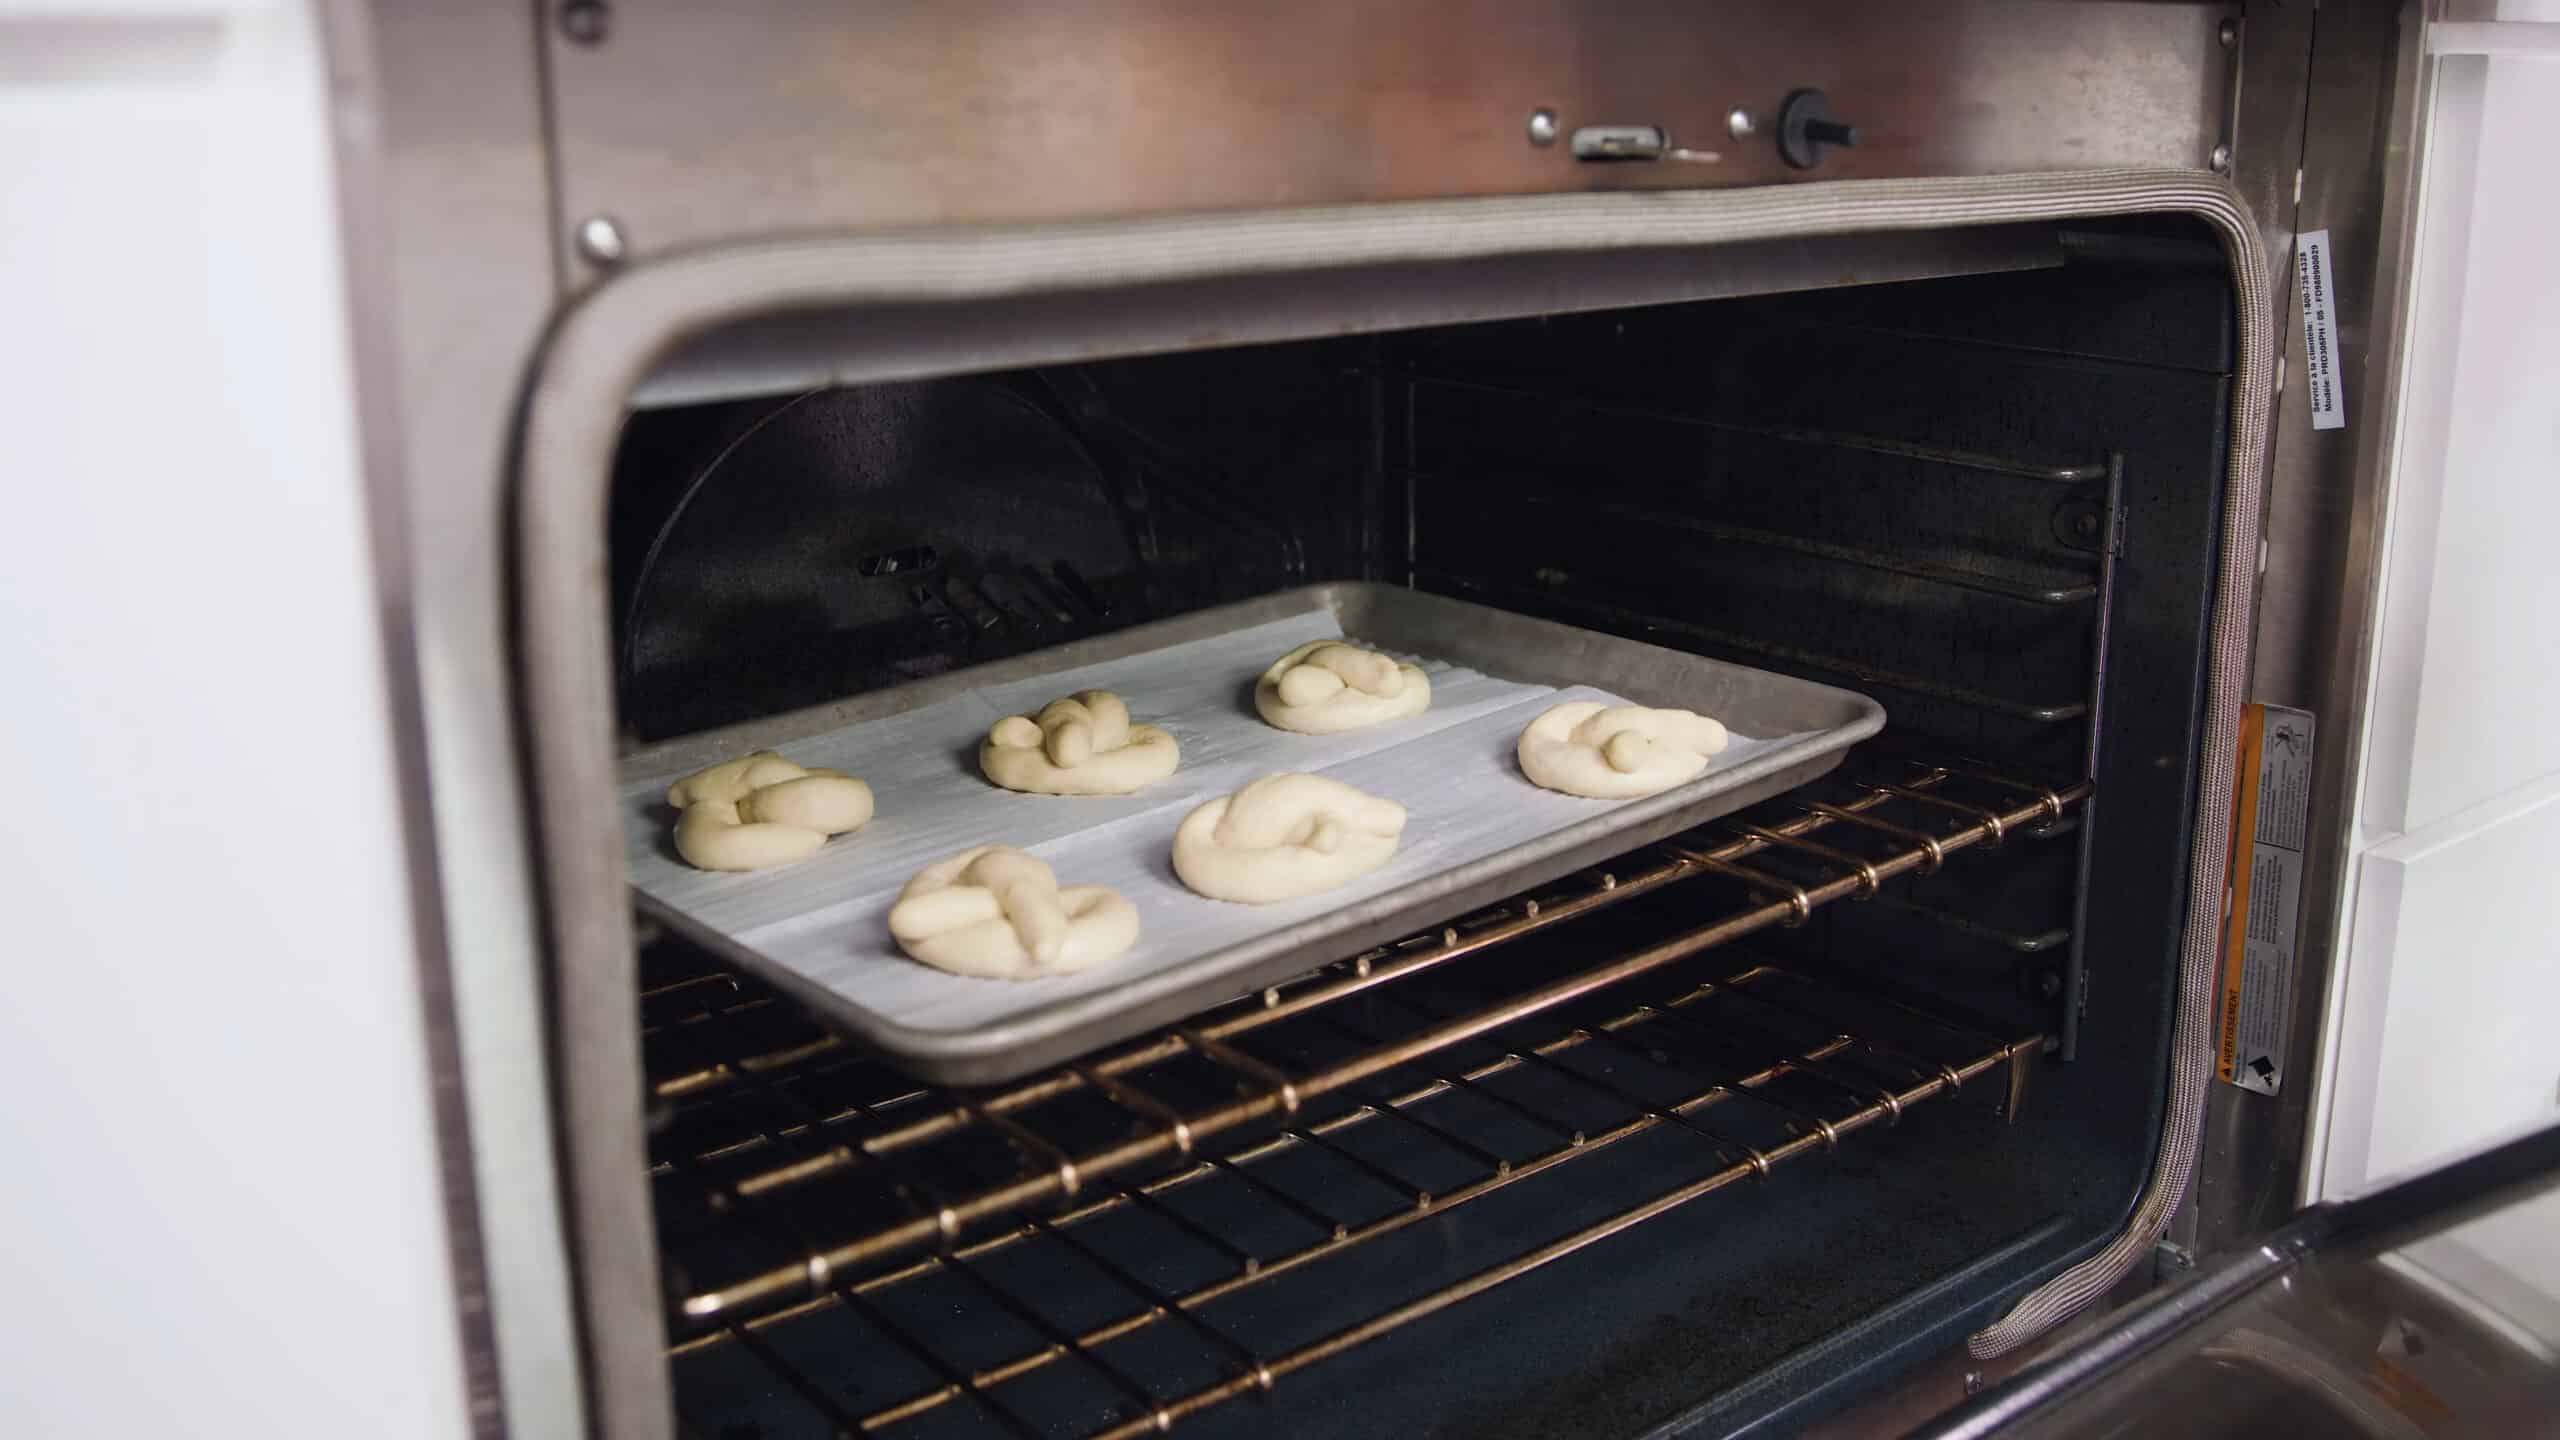 Angled view of open oven with metal baking sheet lined with parchment paper and six hot water dredged shaped pretzels place on a metal rack in the middle of the oven.